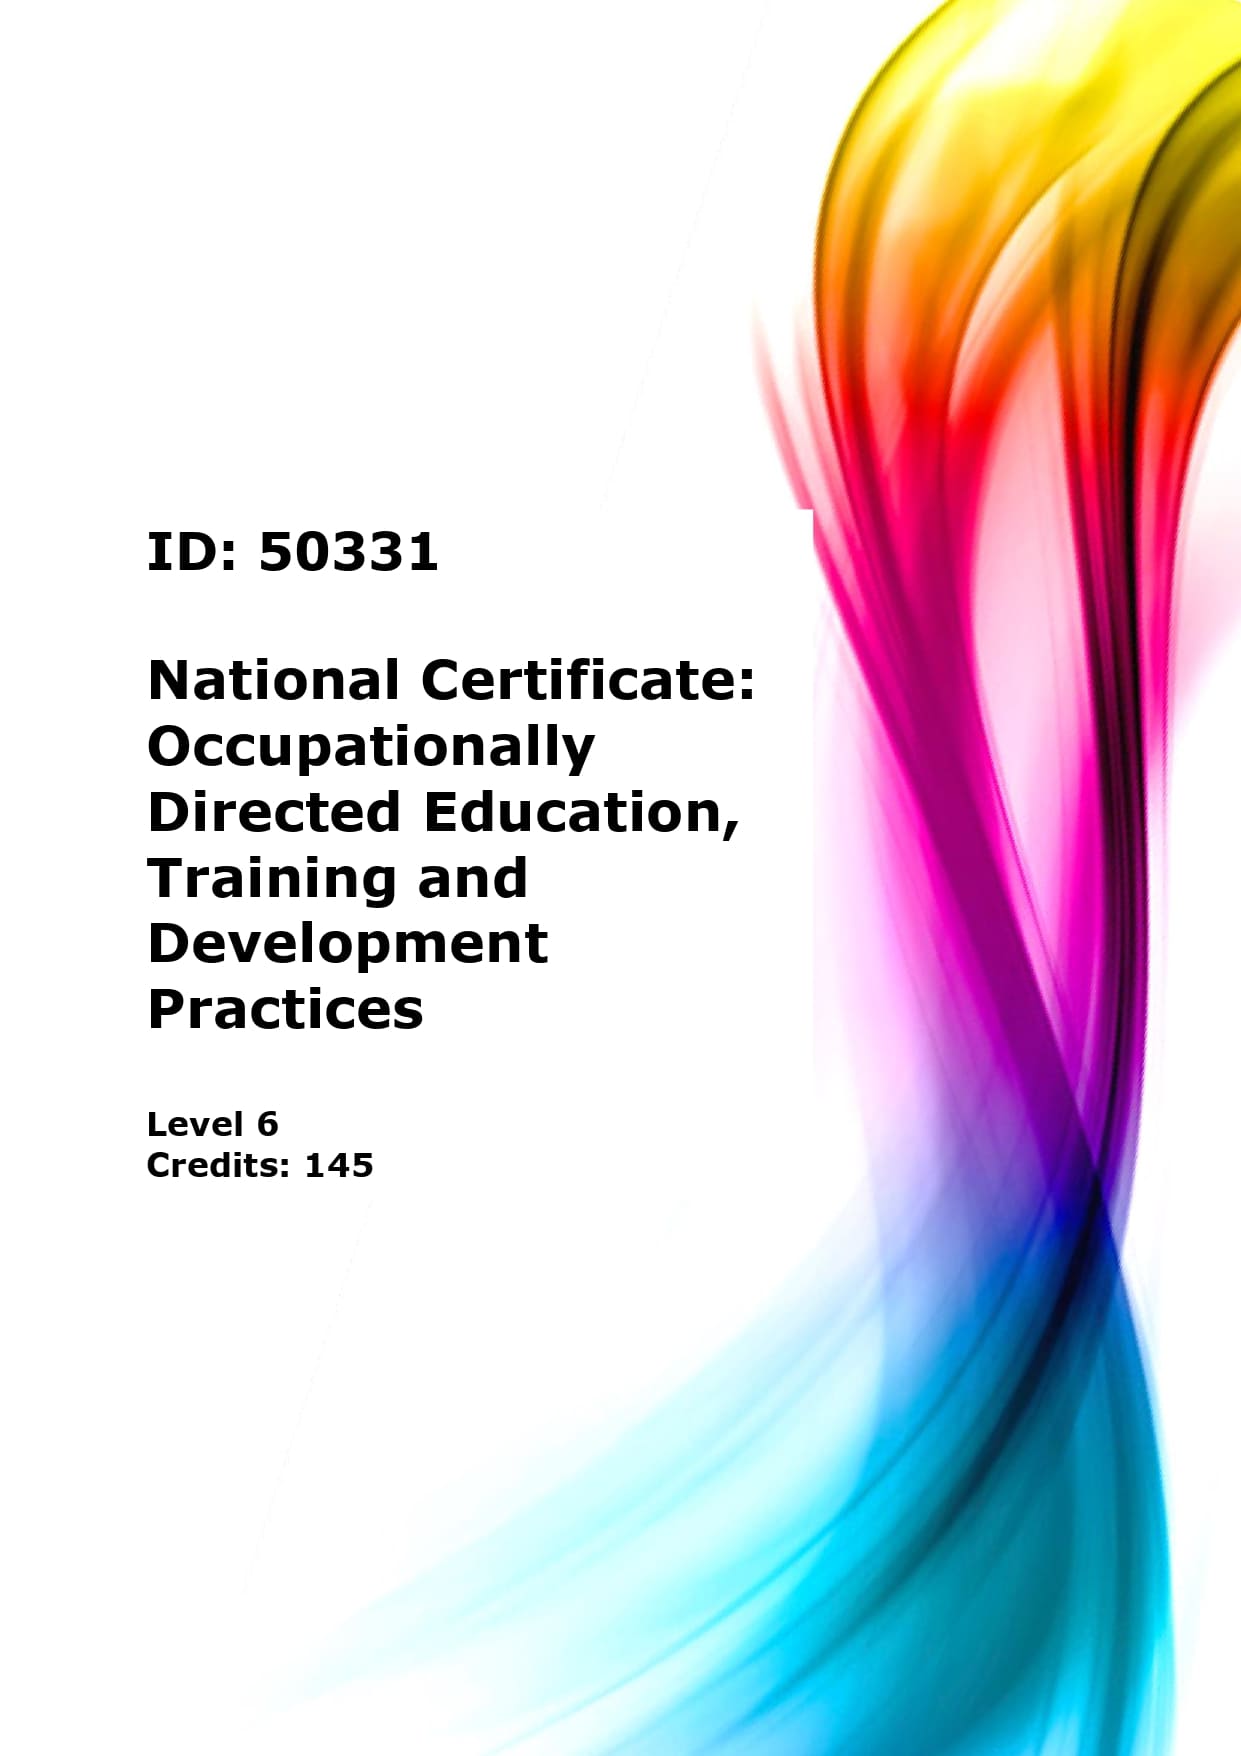 National Certificate: Occupationally Directed Education, Training and Development Practices Level 6